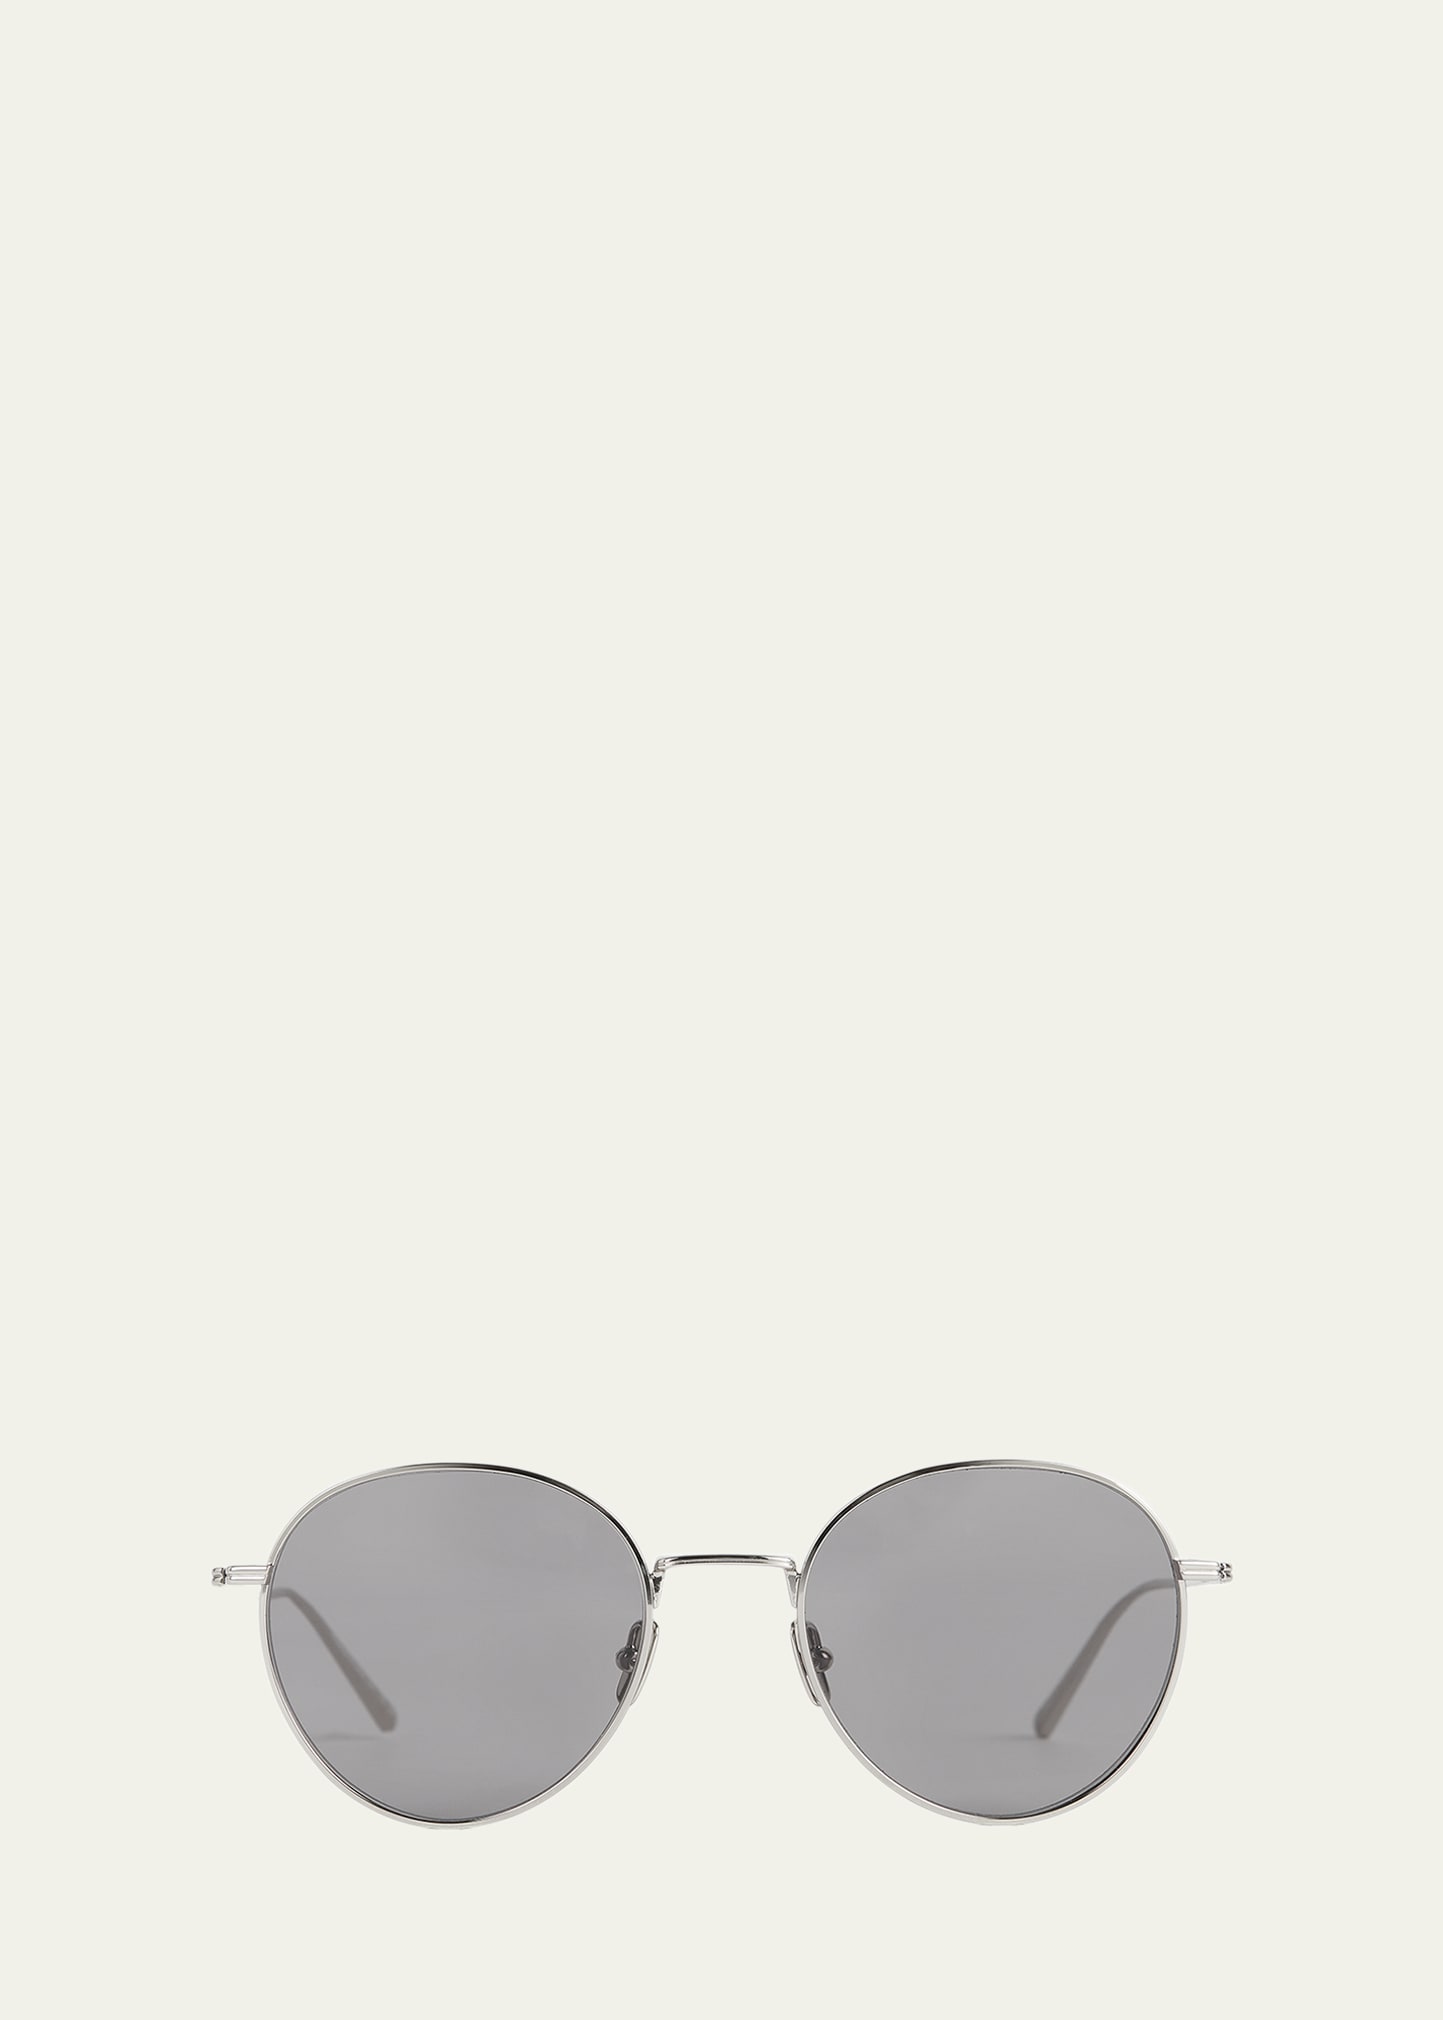 Totême The Rounds Stainless Steel Round Sunglasses In Gray